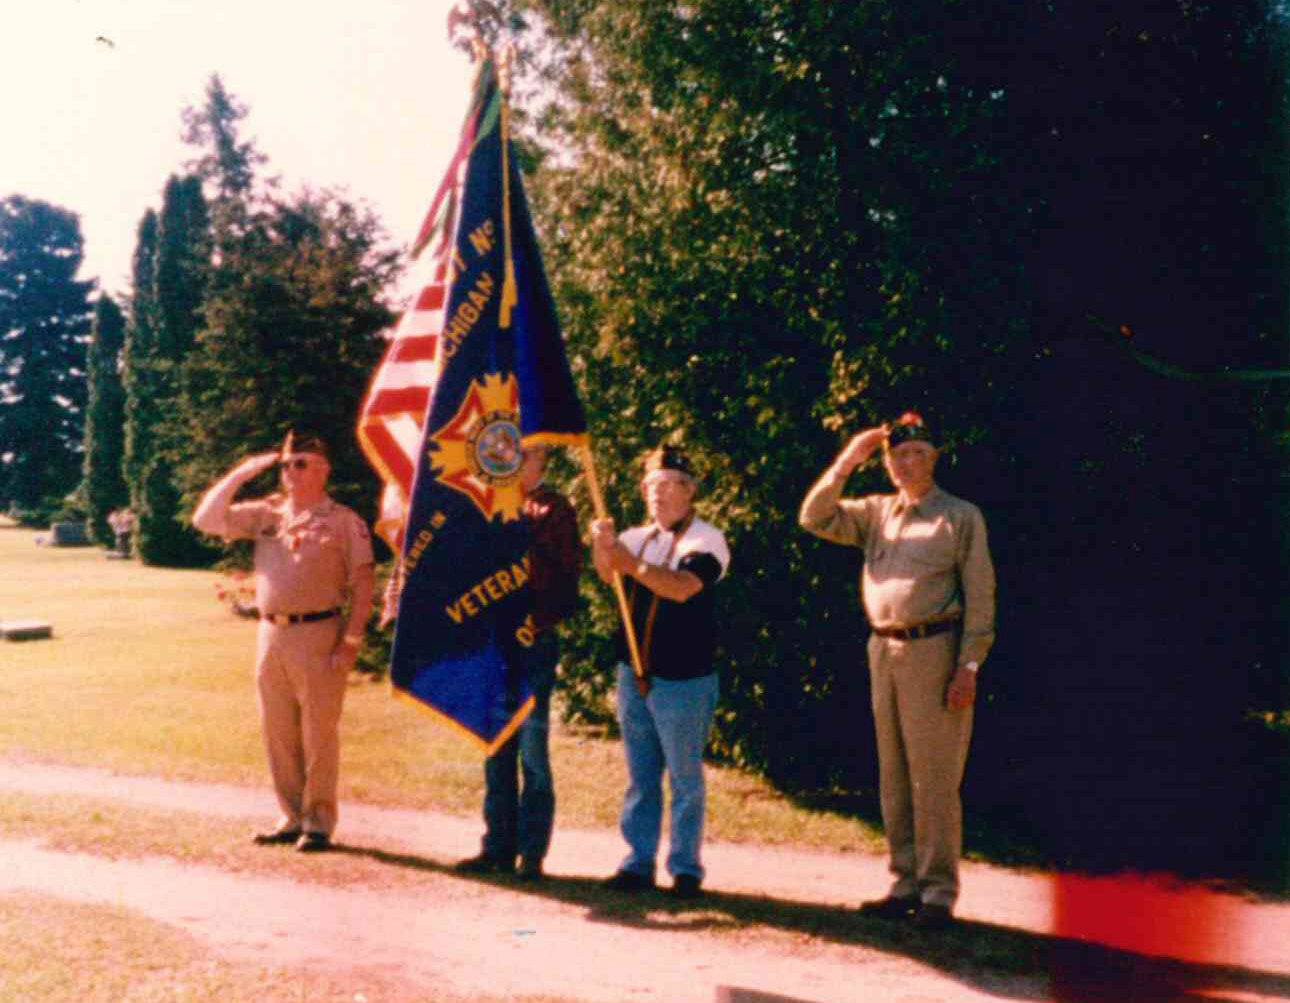 VFW members with flags